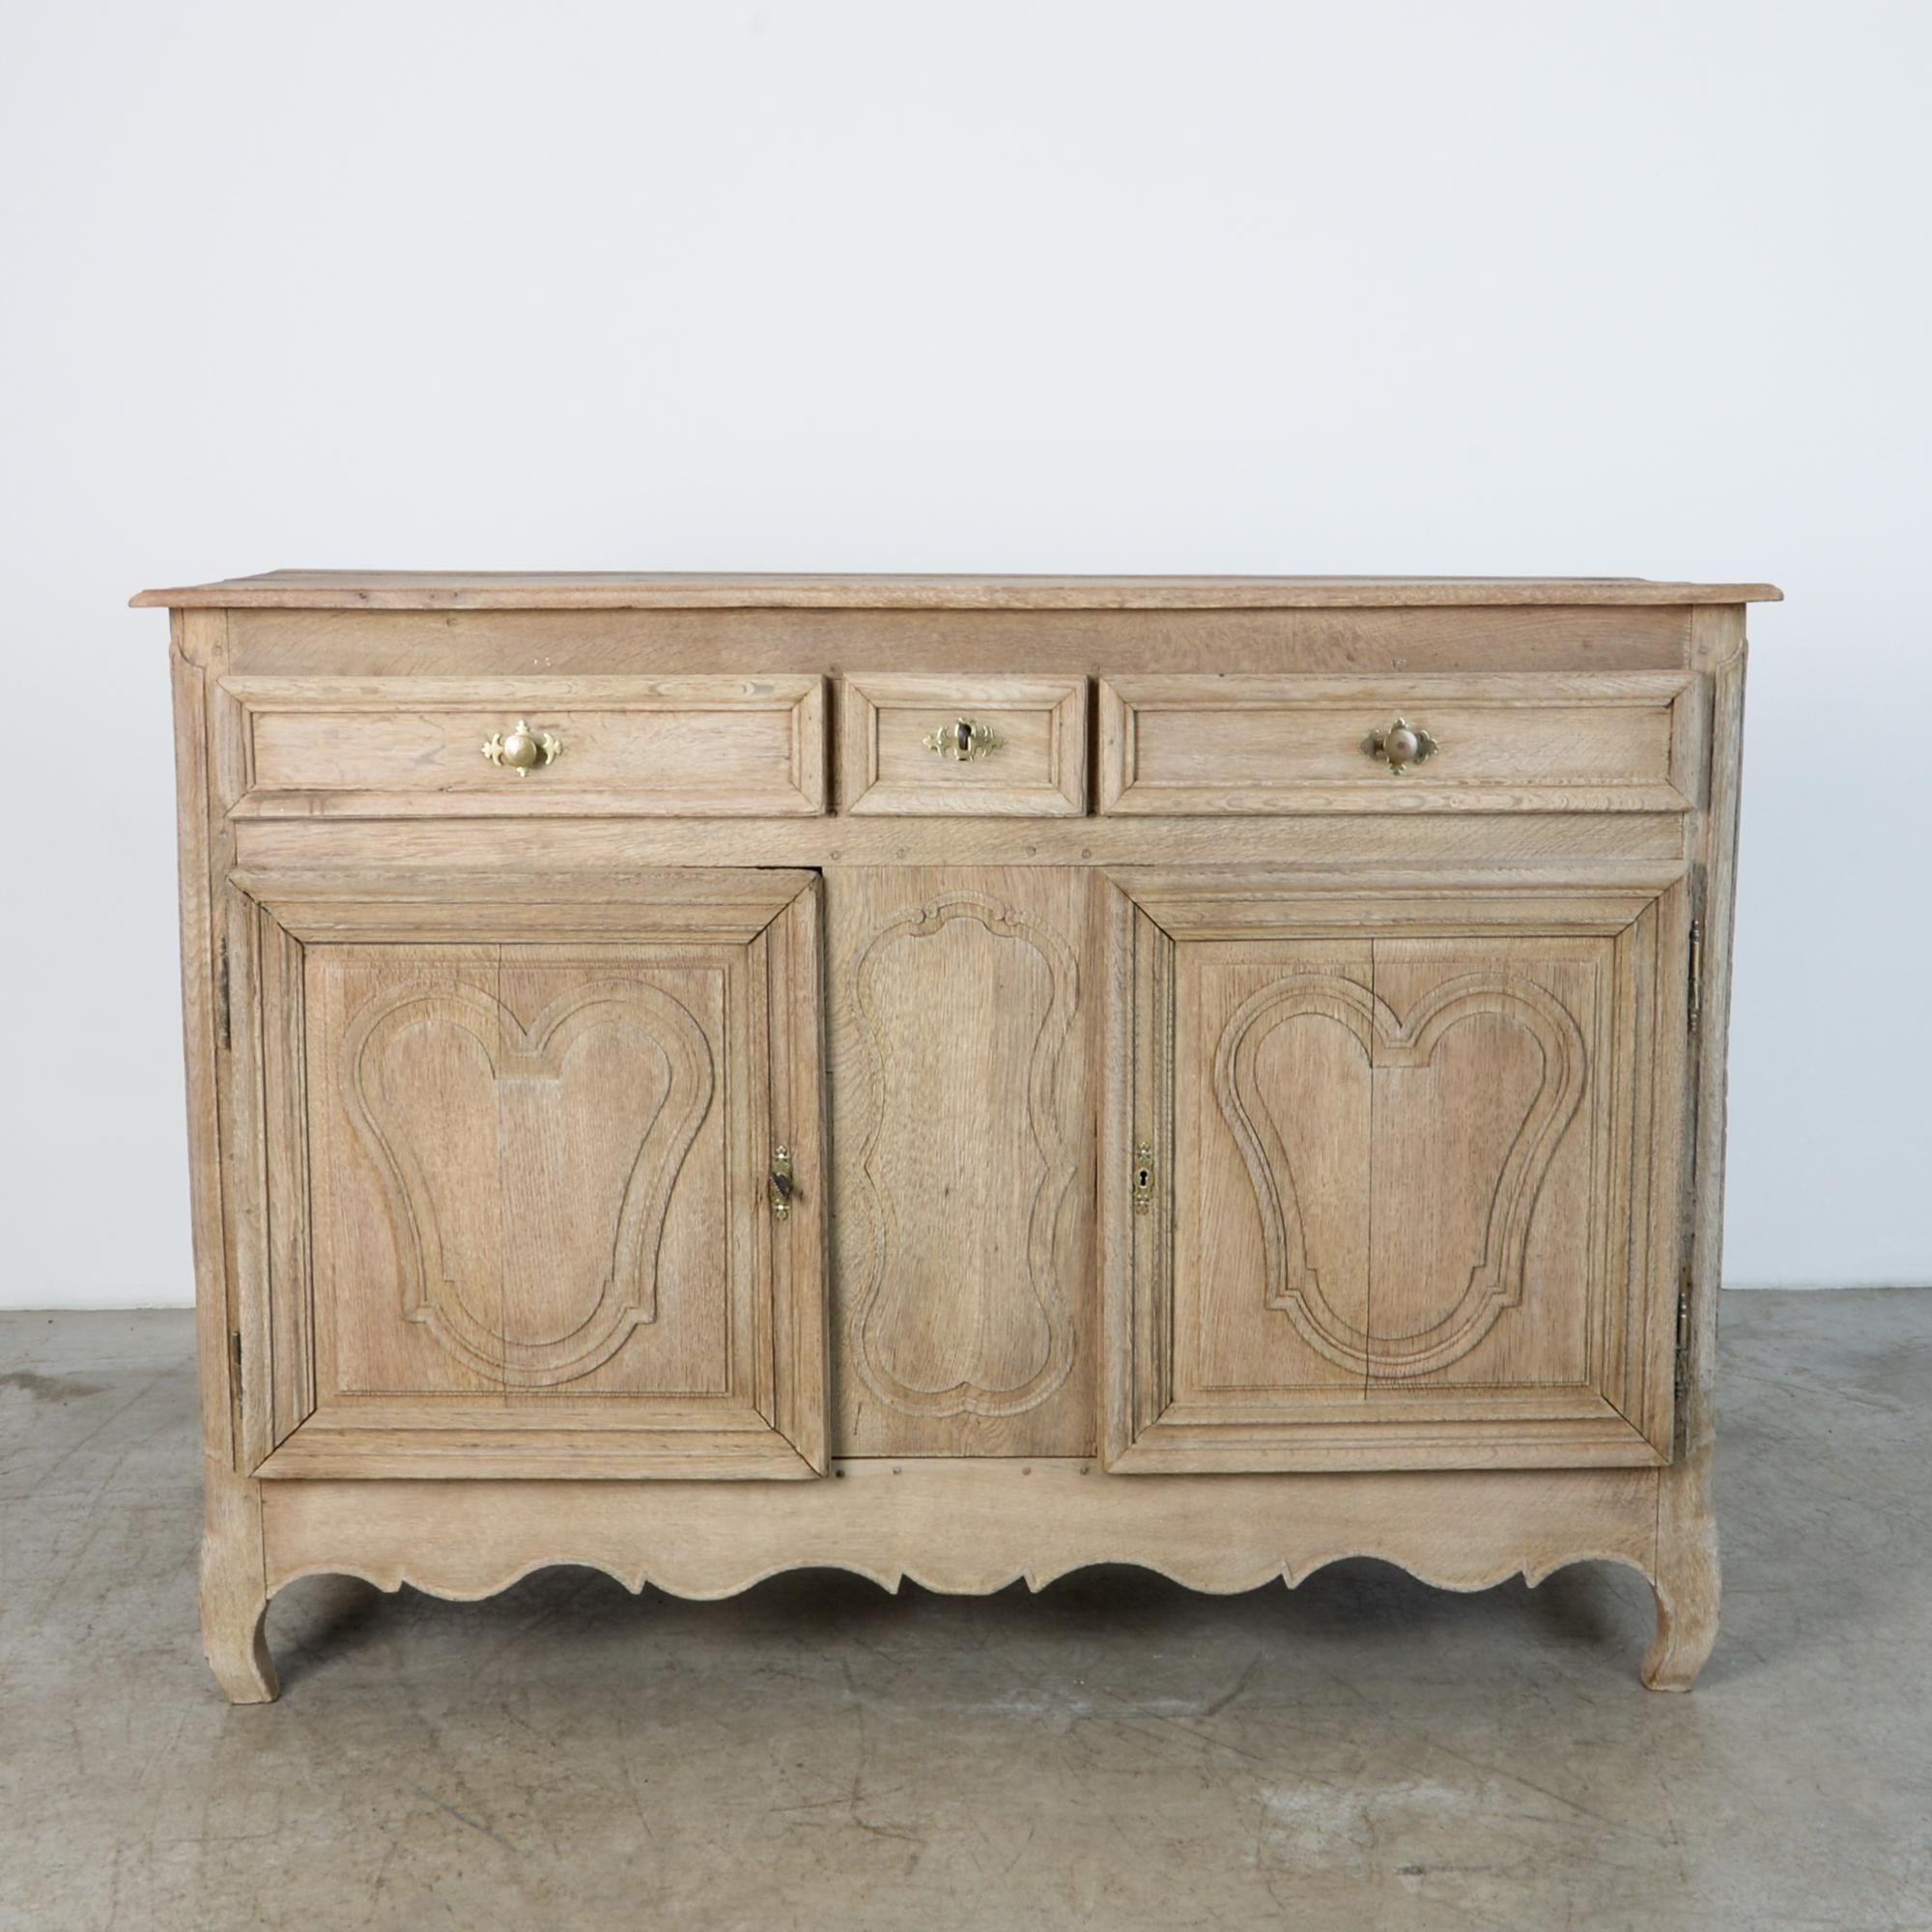 An oak buffet from France, circa 1860. Handles and locks are fully functional casted brass with beautiful worn patina. Carved drawer panels, underlined by an elegant carved apron.

The bleached oak finish is achieved through the application of